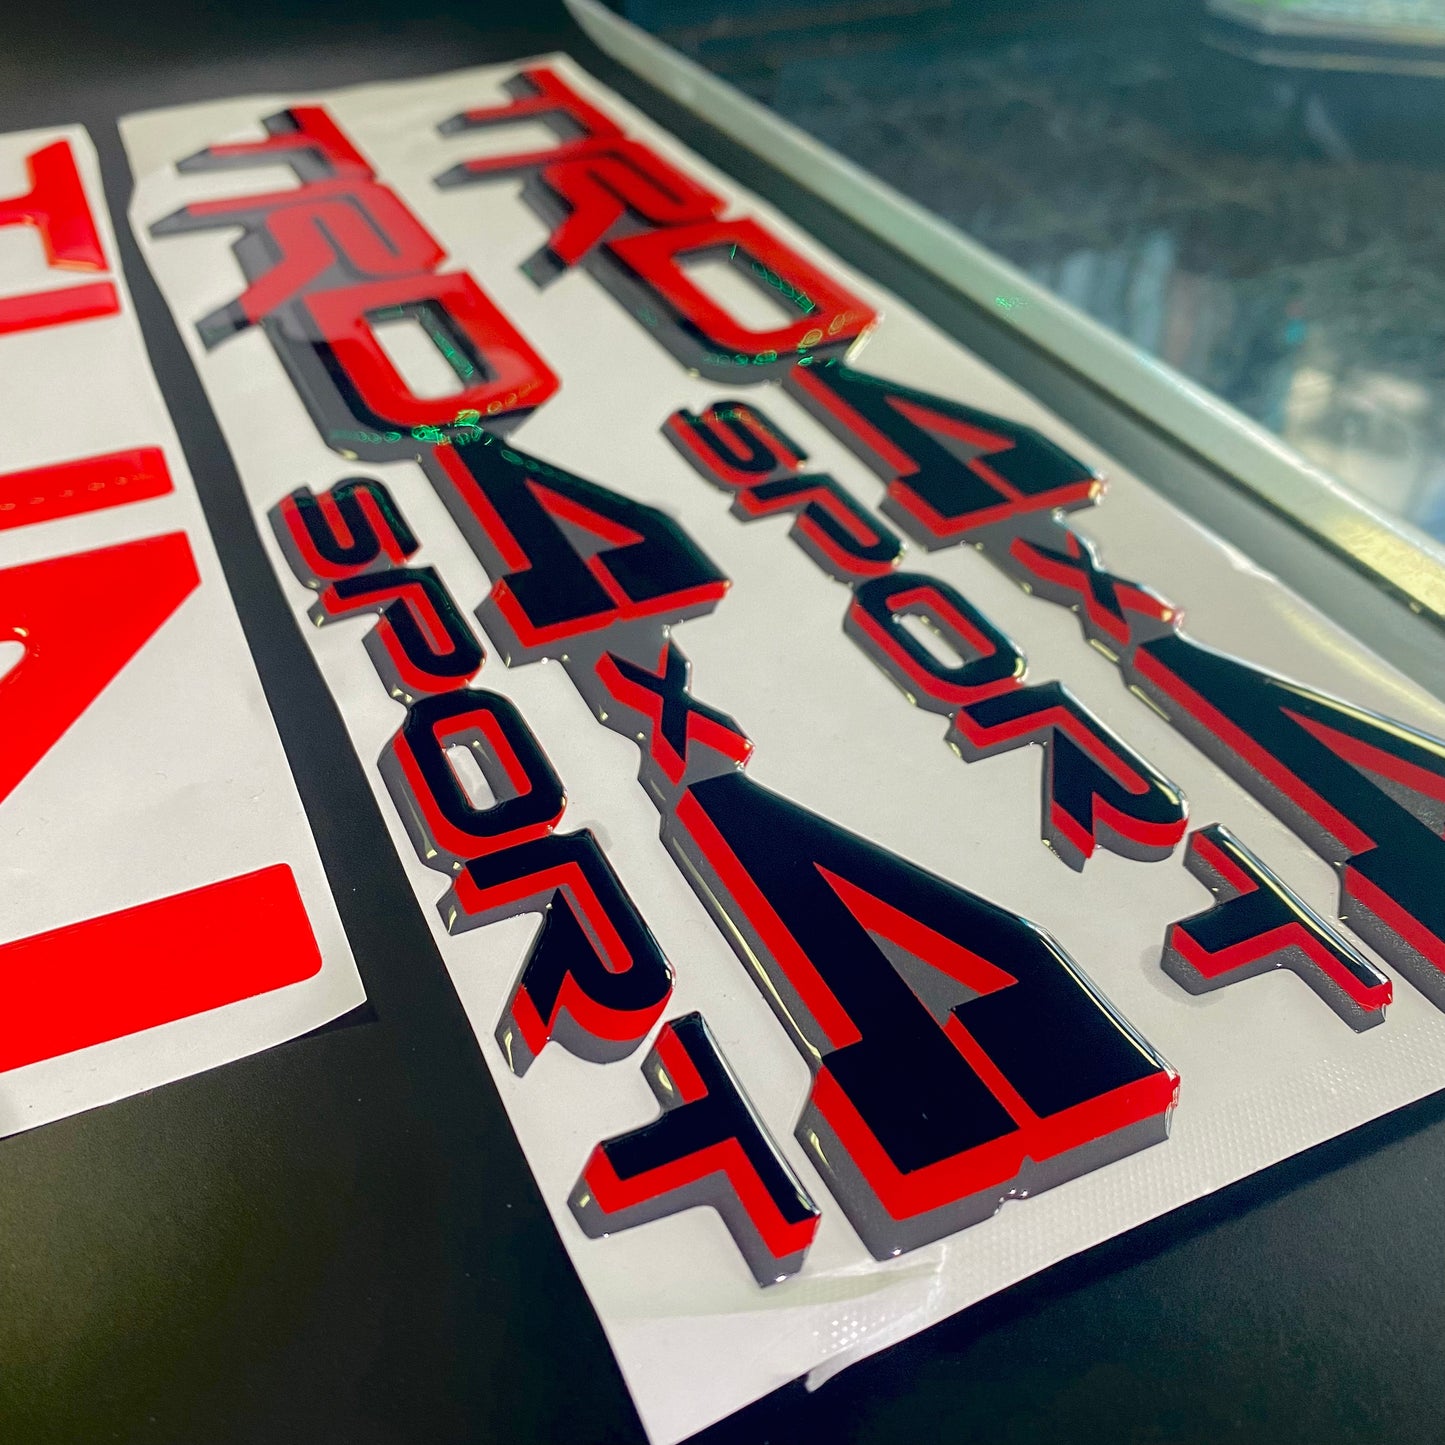 Tundra 2022 Gel Sticker for Tailgate  Insert Letters